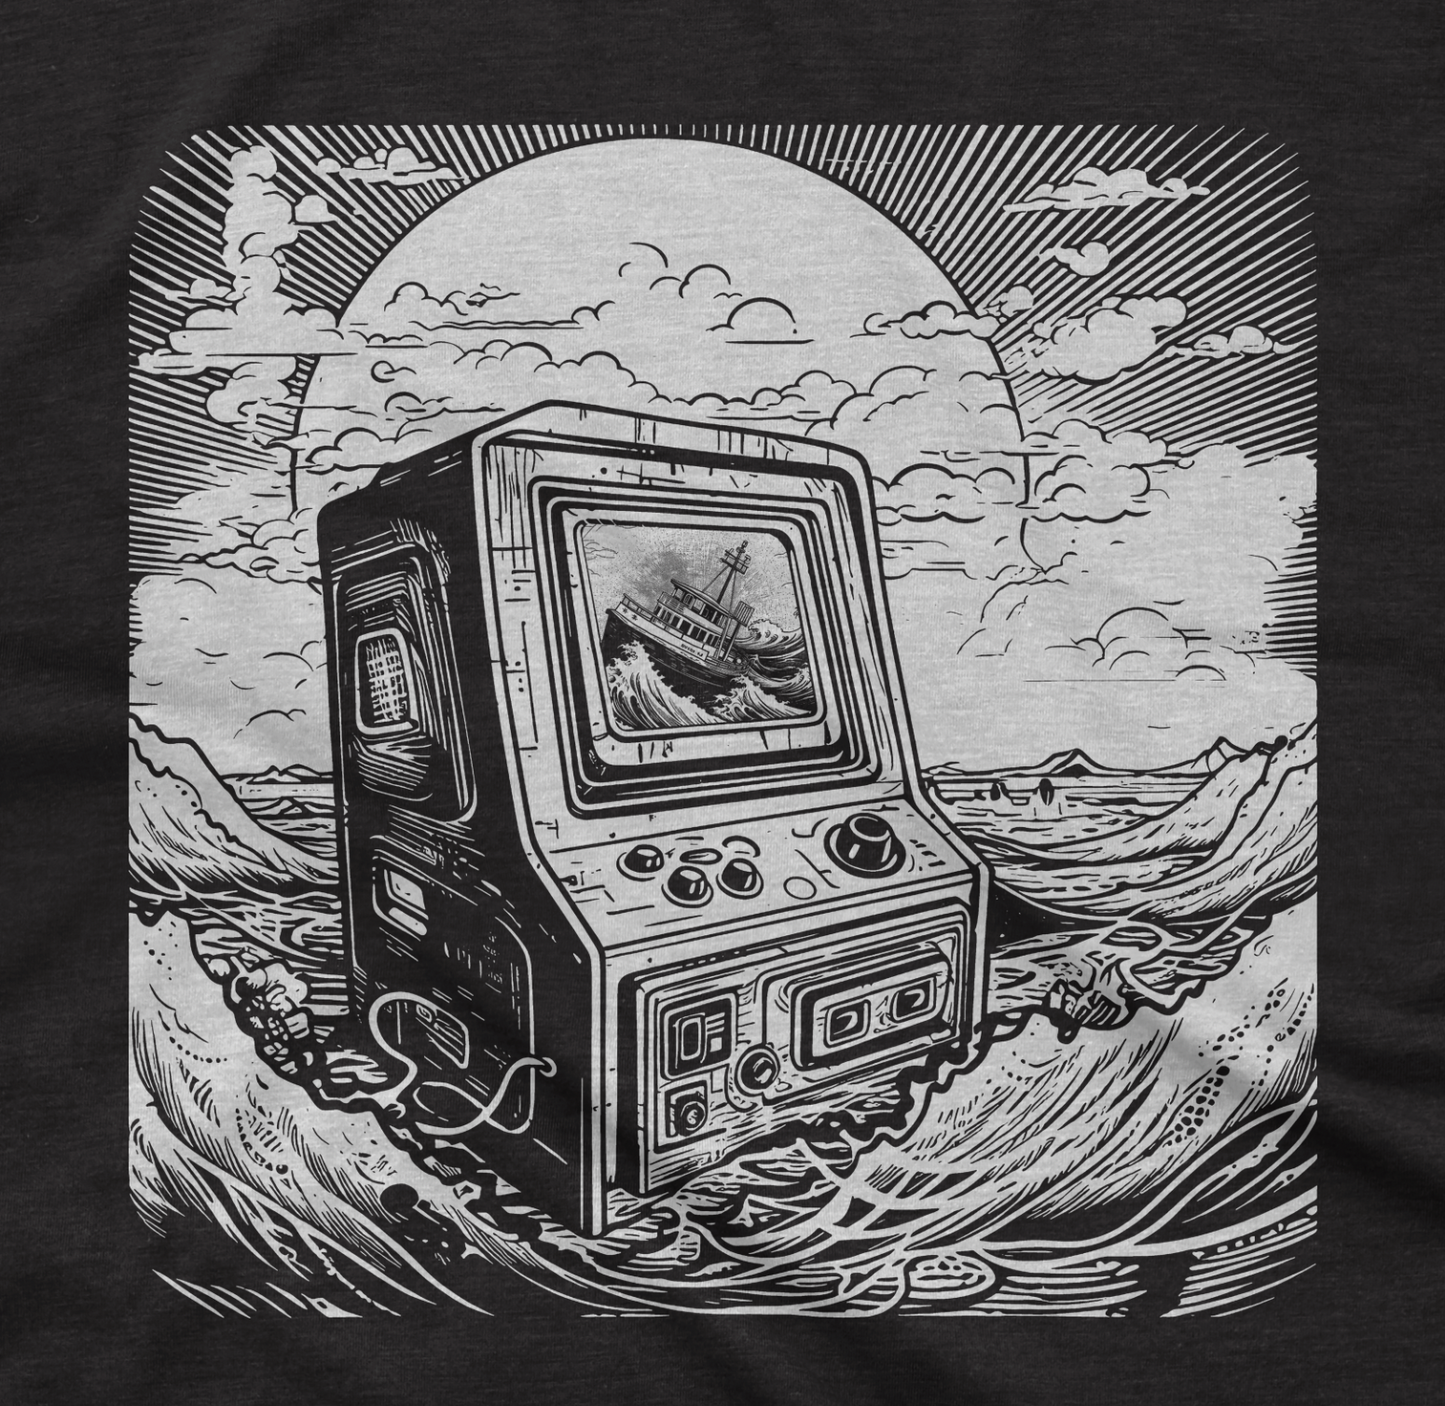 Drowning in the Arcade Unisex T-Shirt